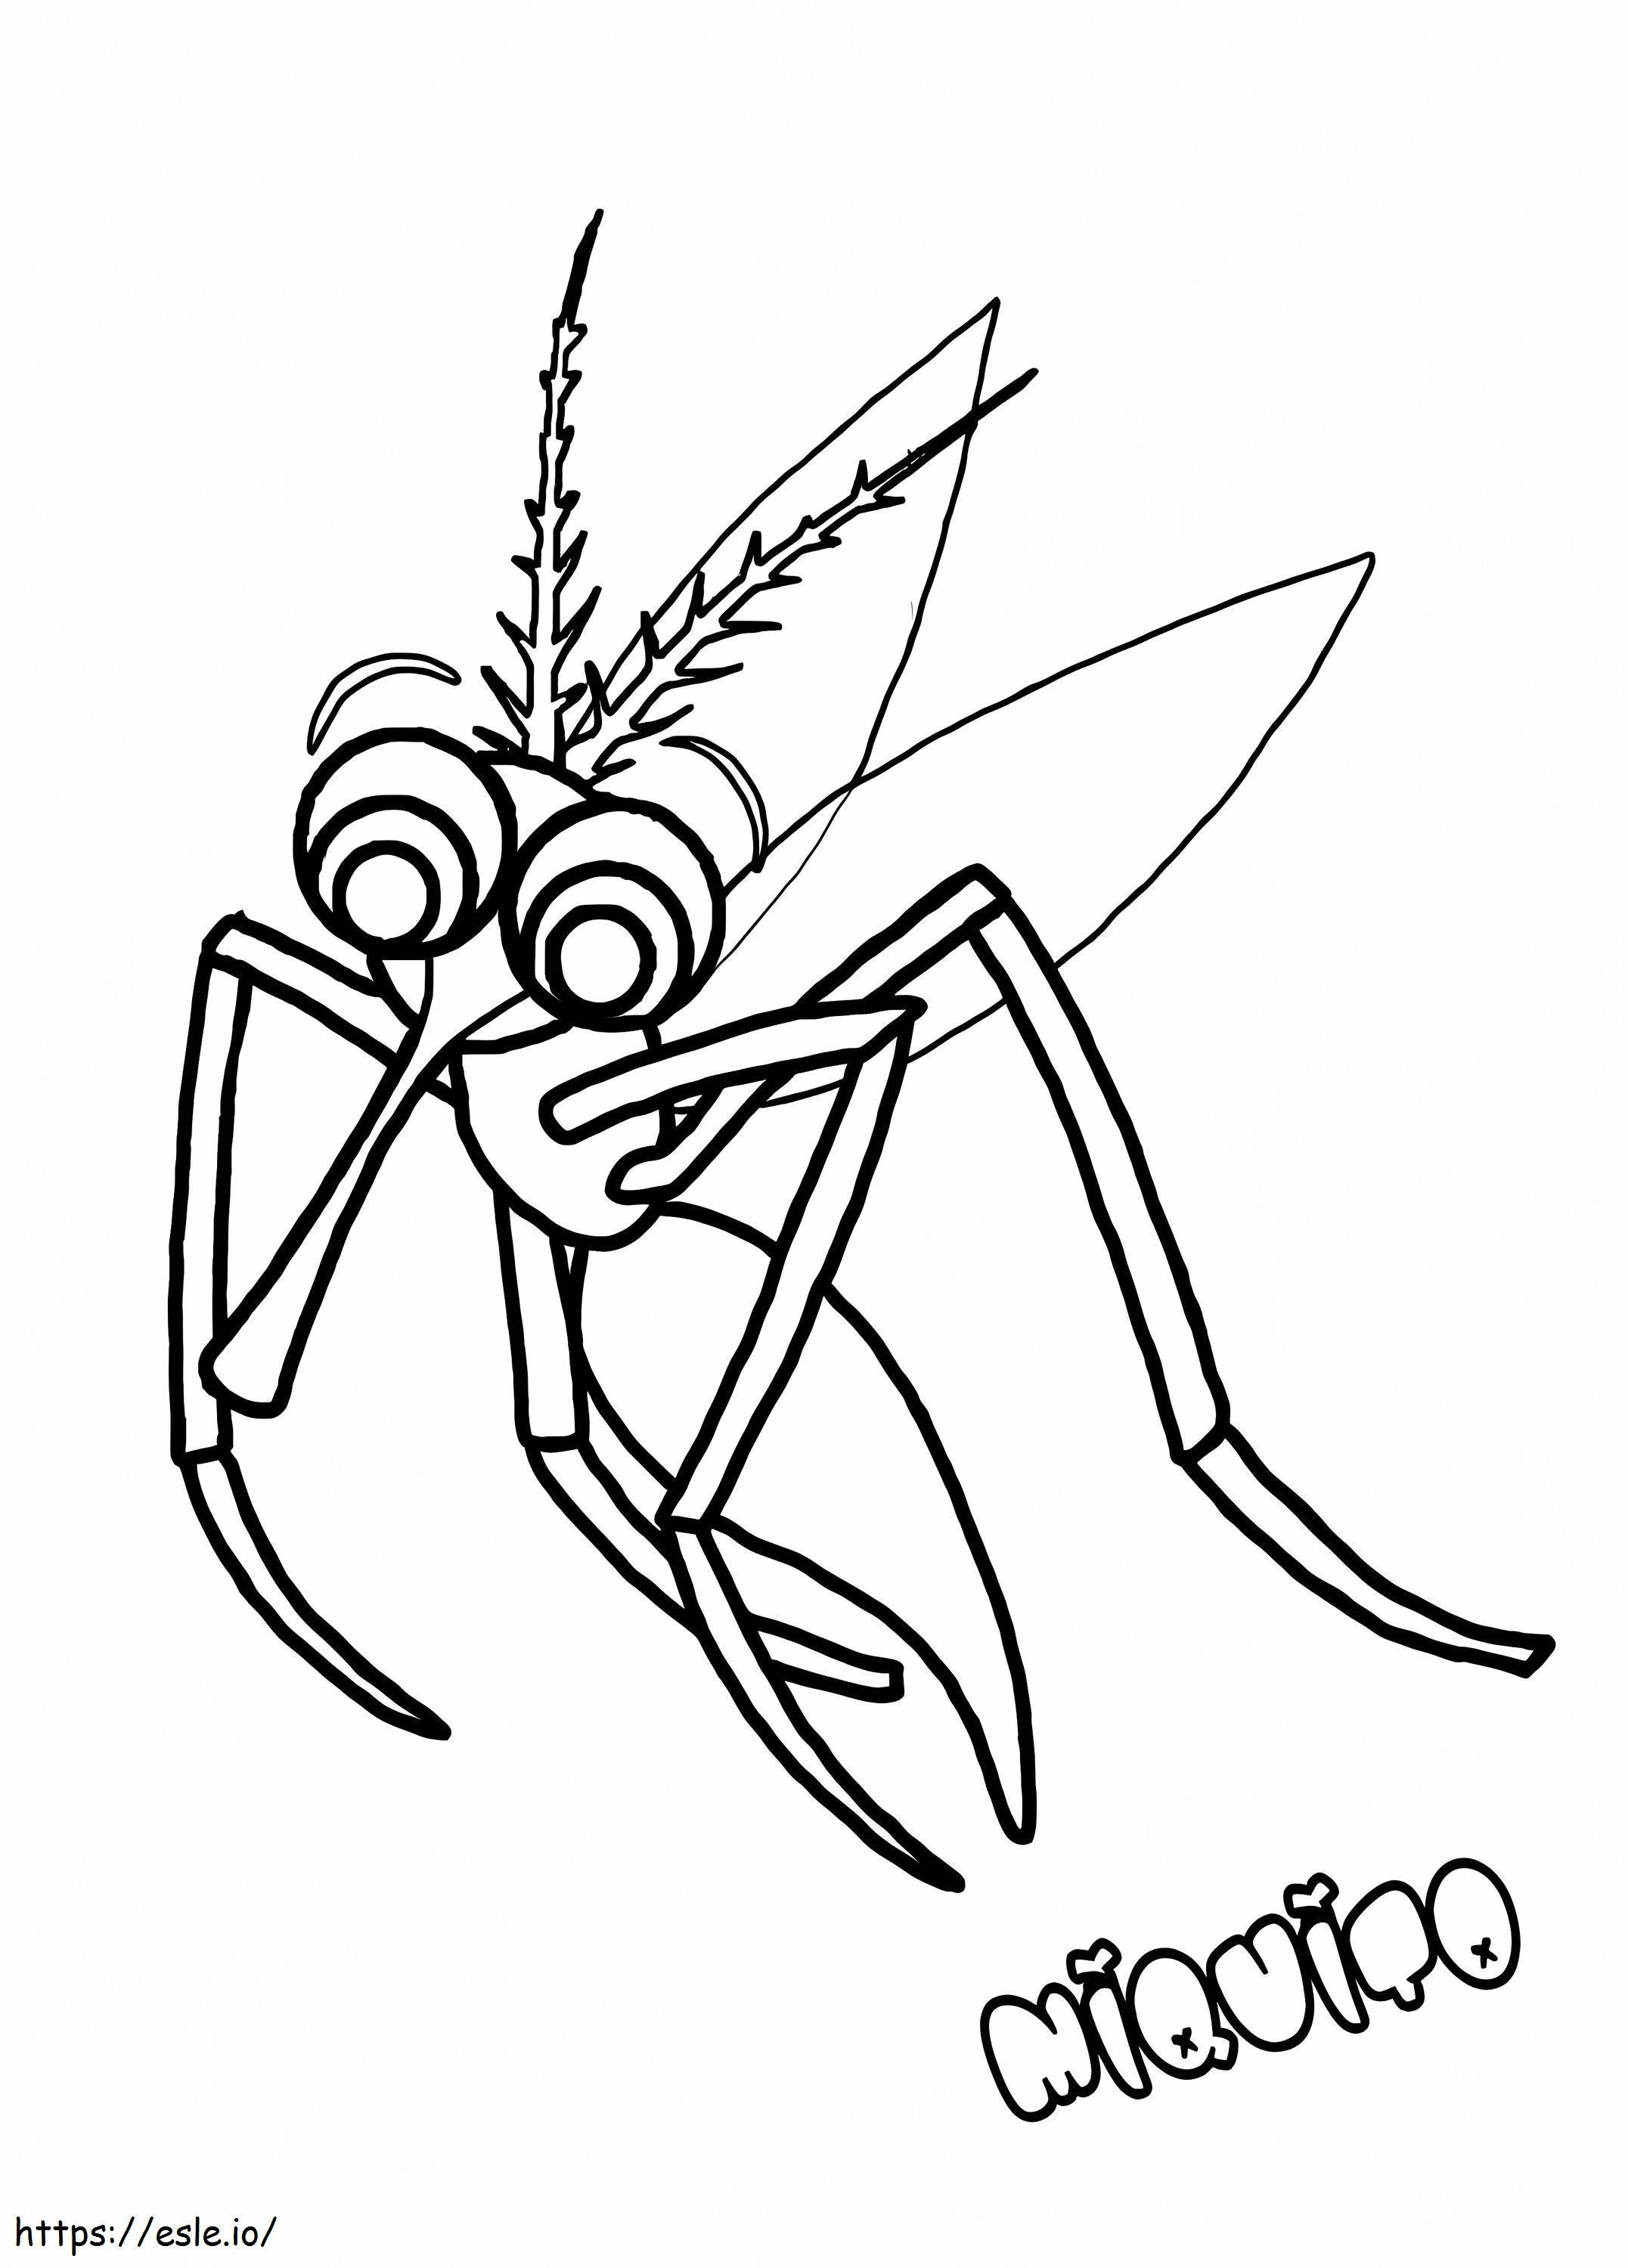 Adorable Mosquito coloring page